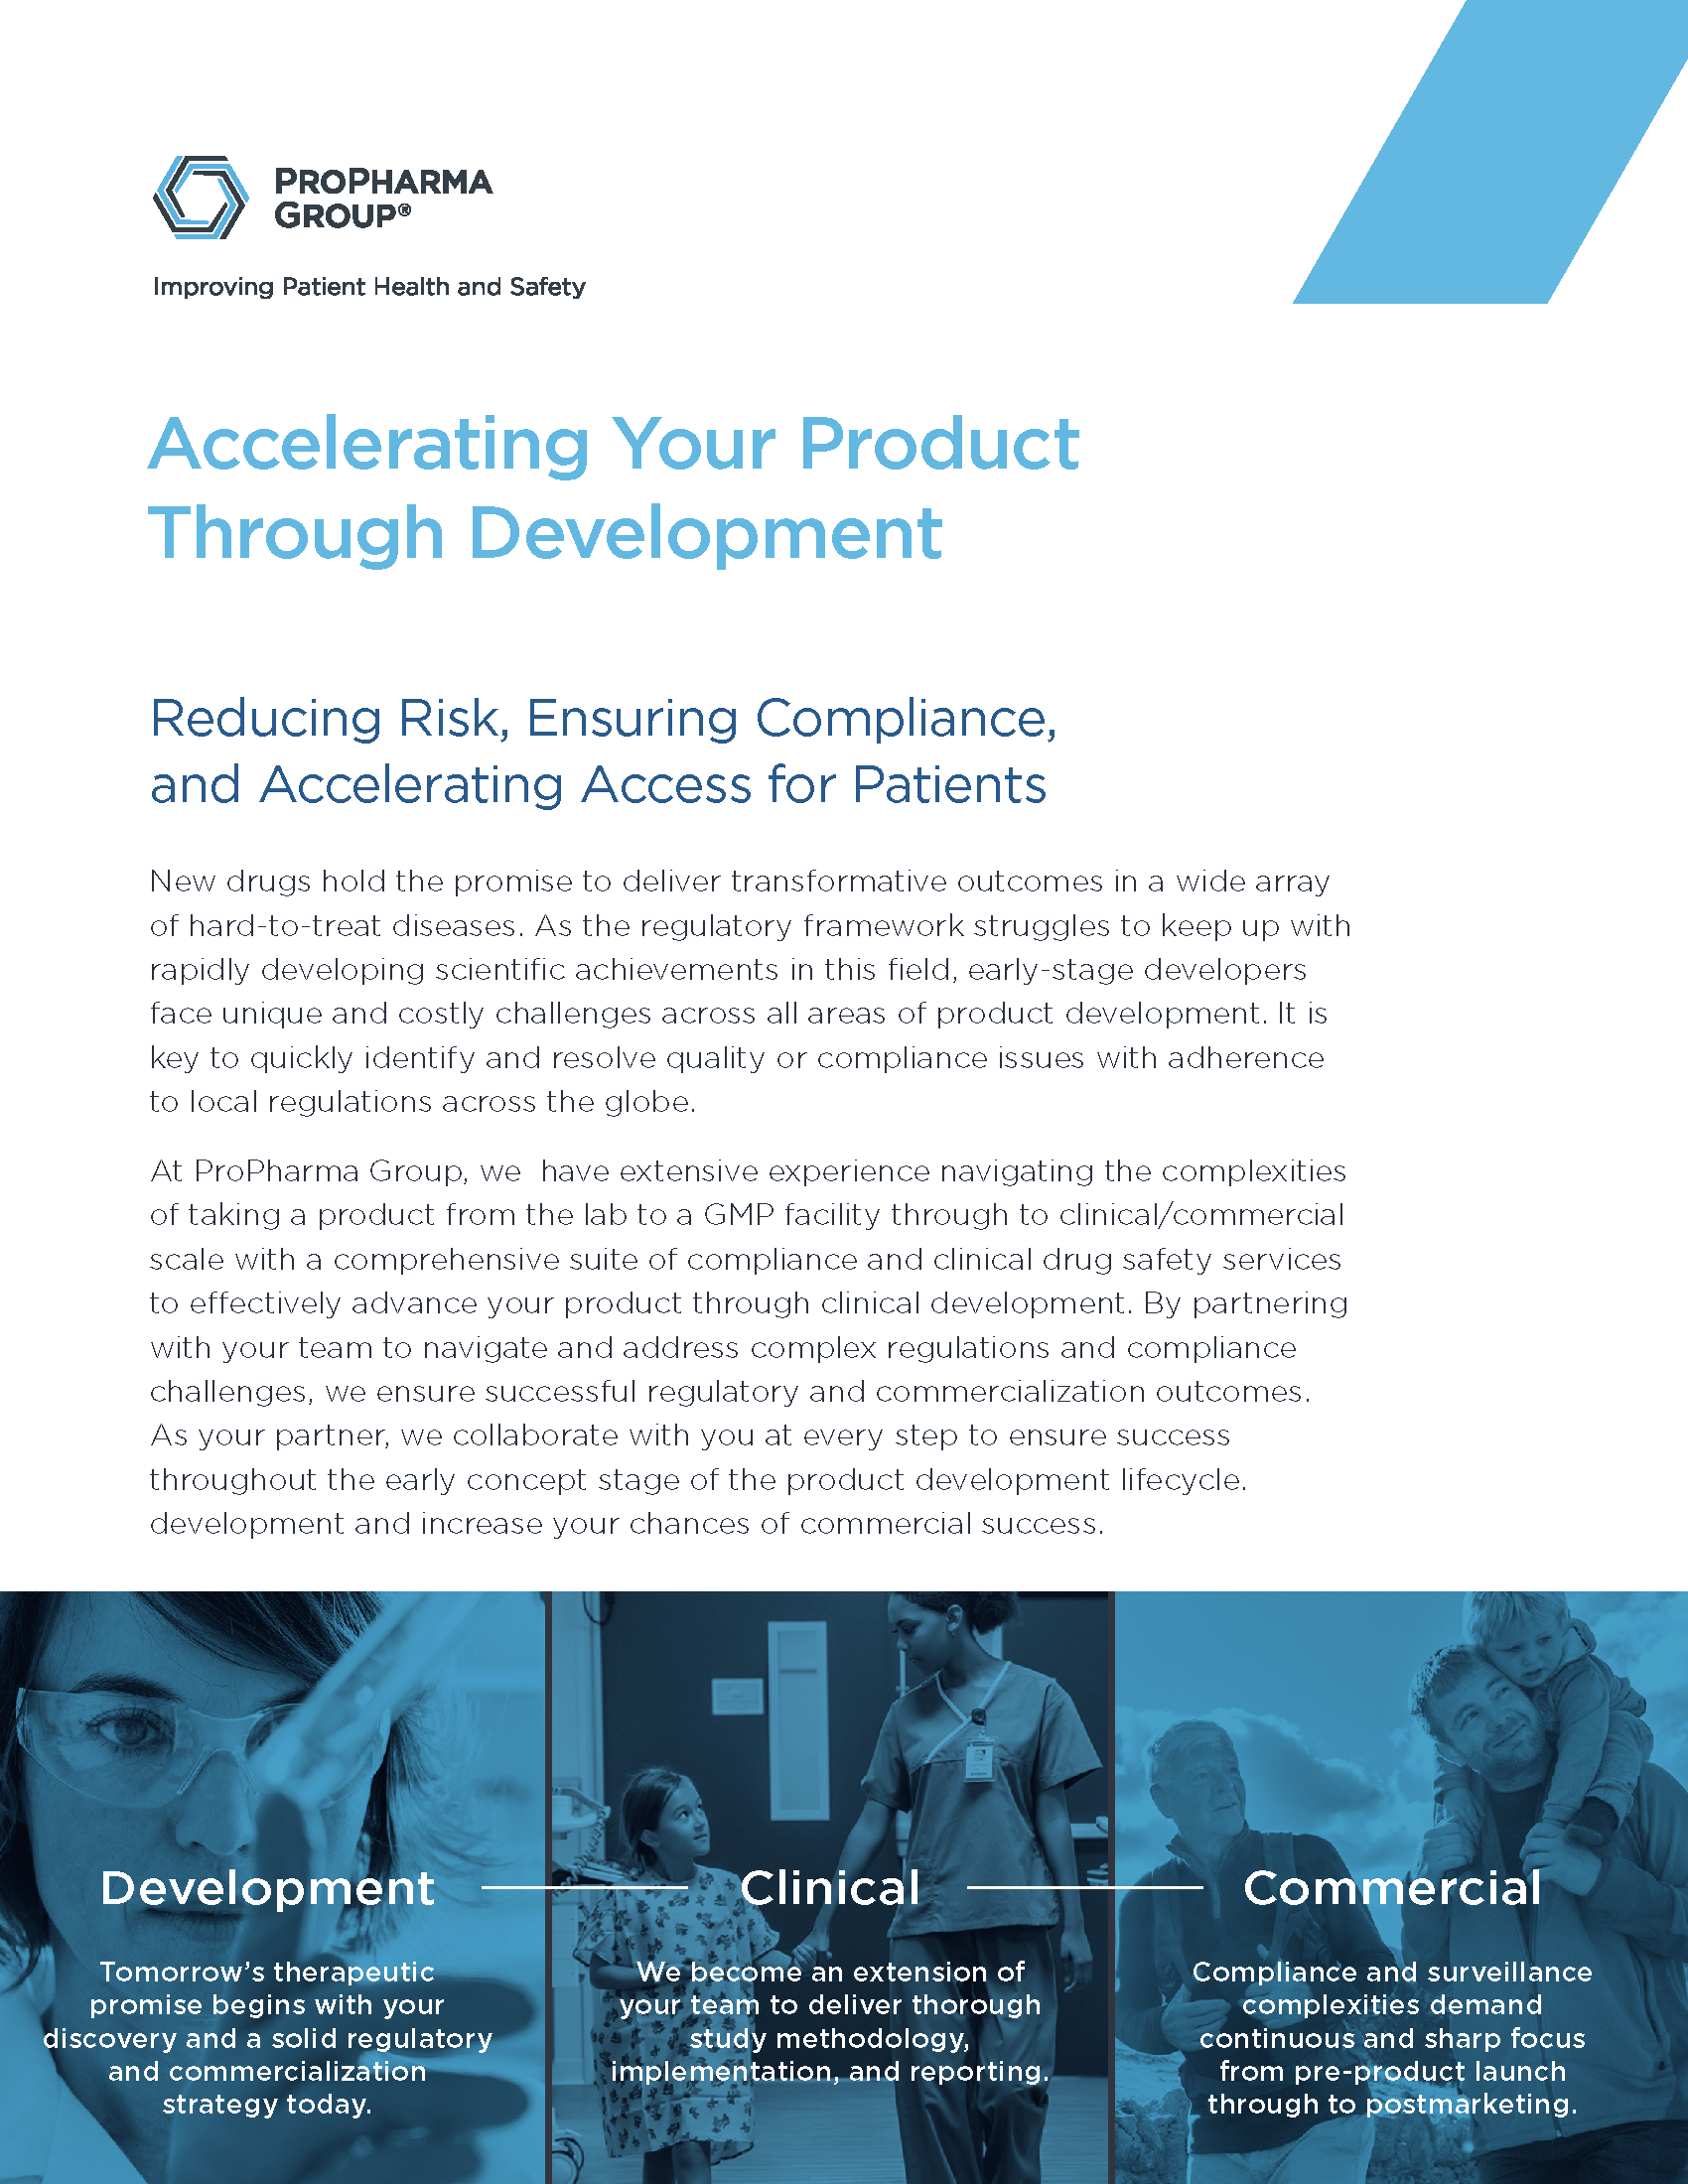 Accelerating Your Product Through Drug Development Image